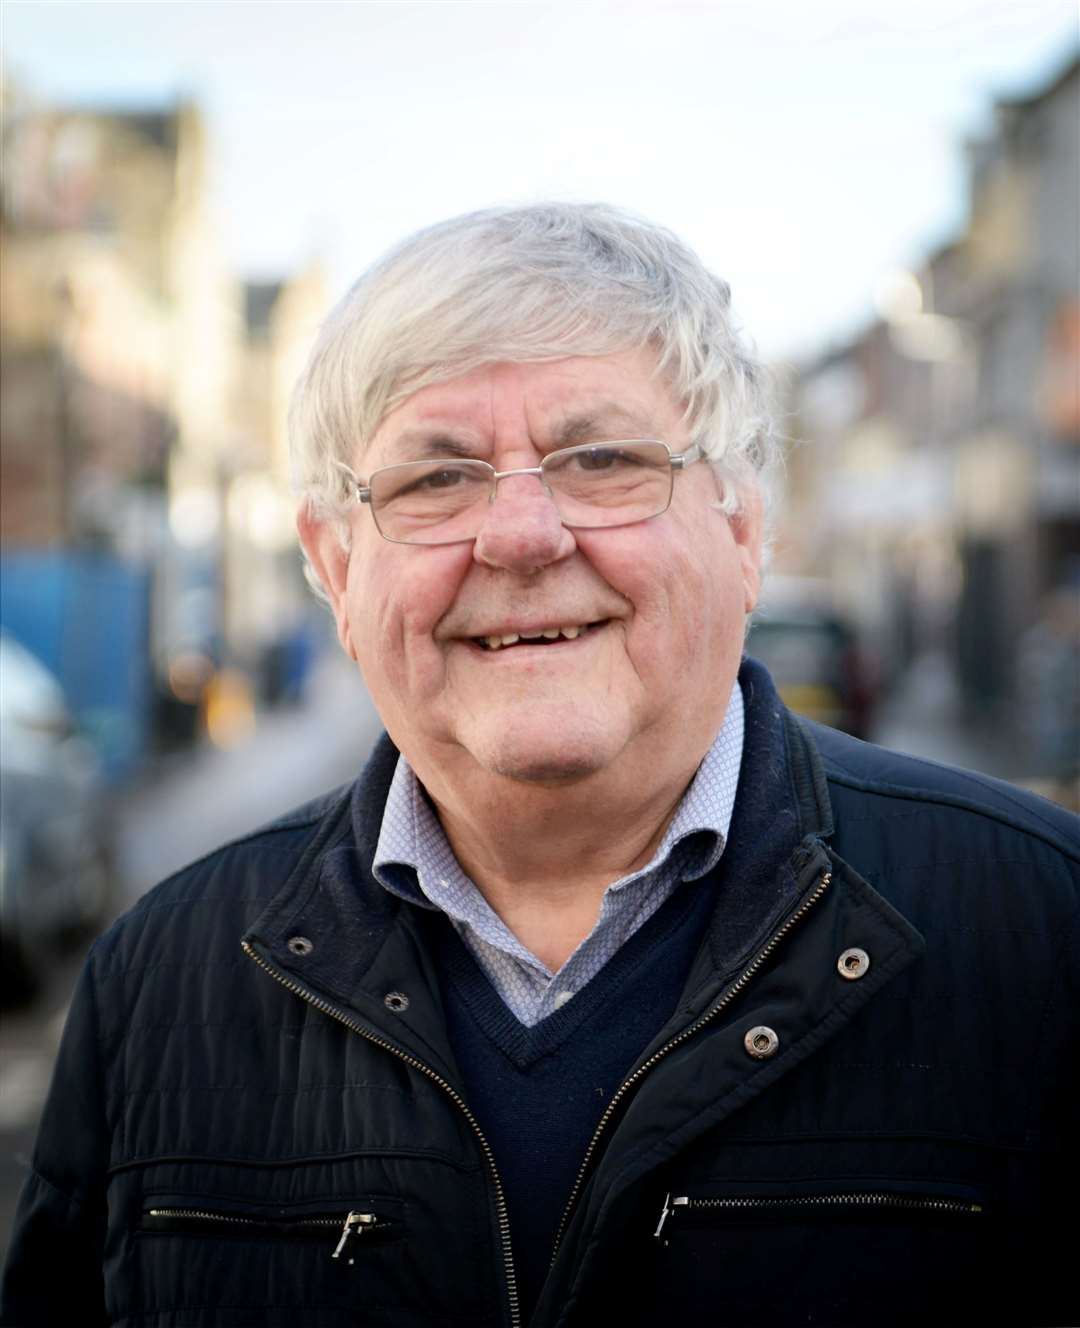 Councillor Graham Mackenzie will chair the communities and place committee.